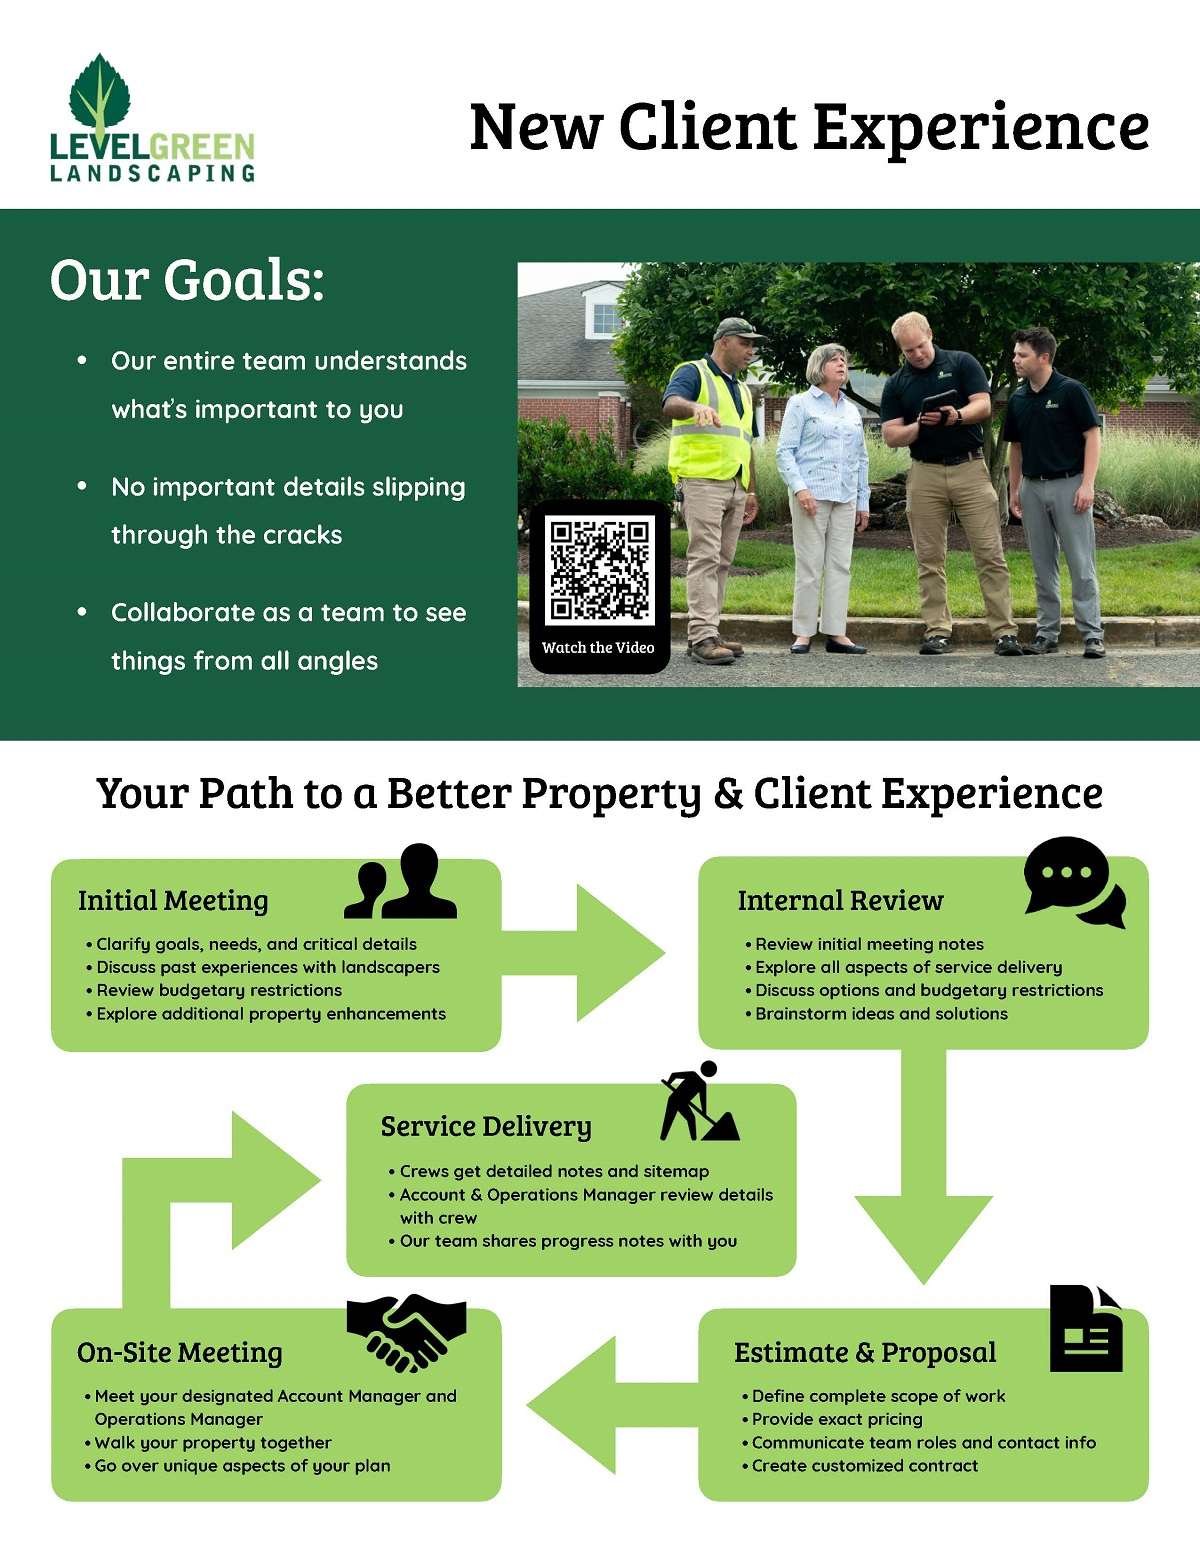 Level Green New Client Experience Infographic